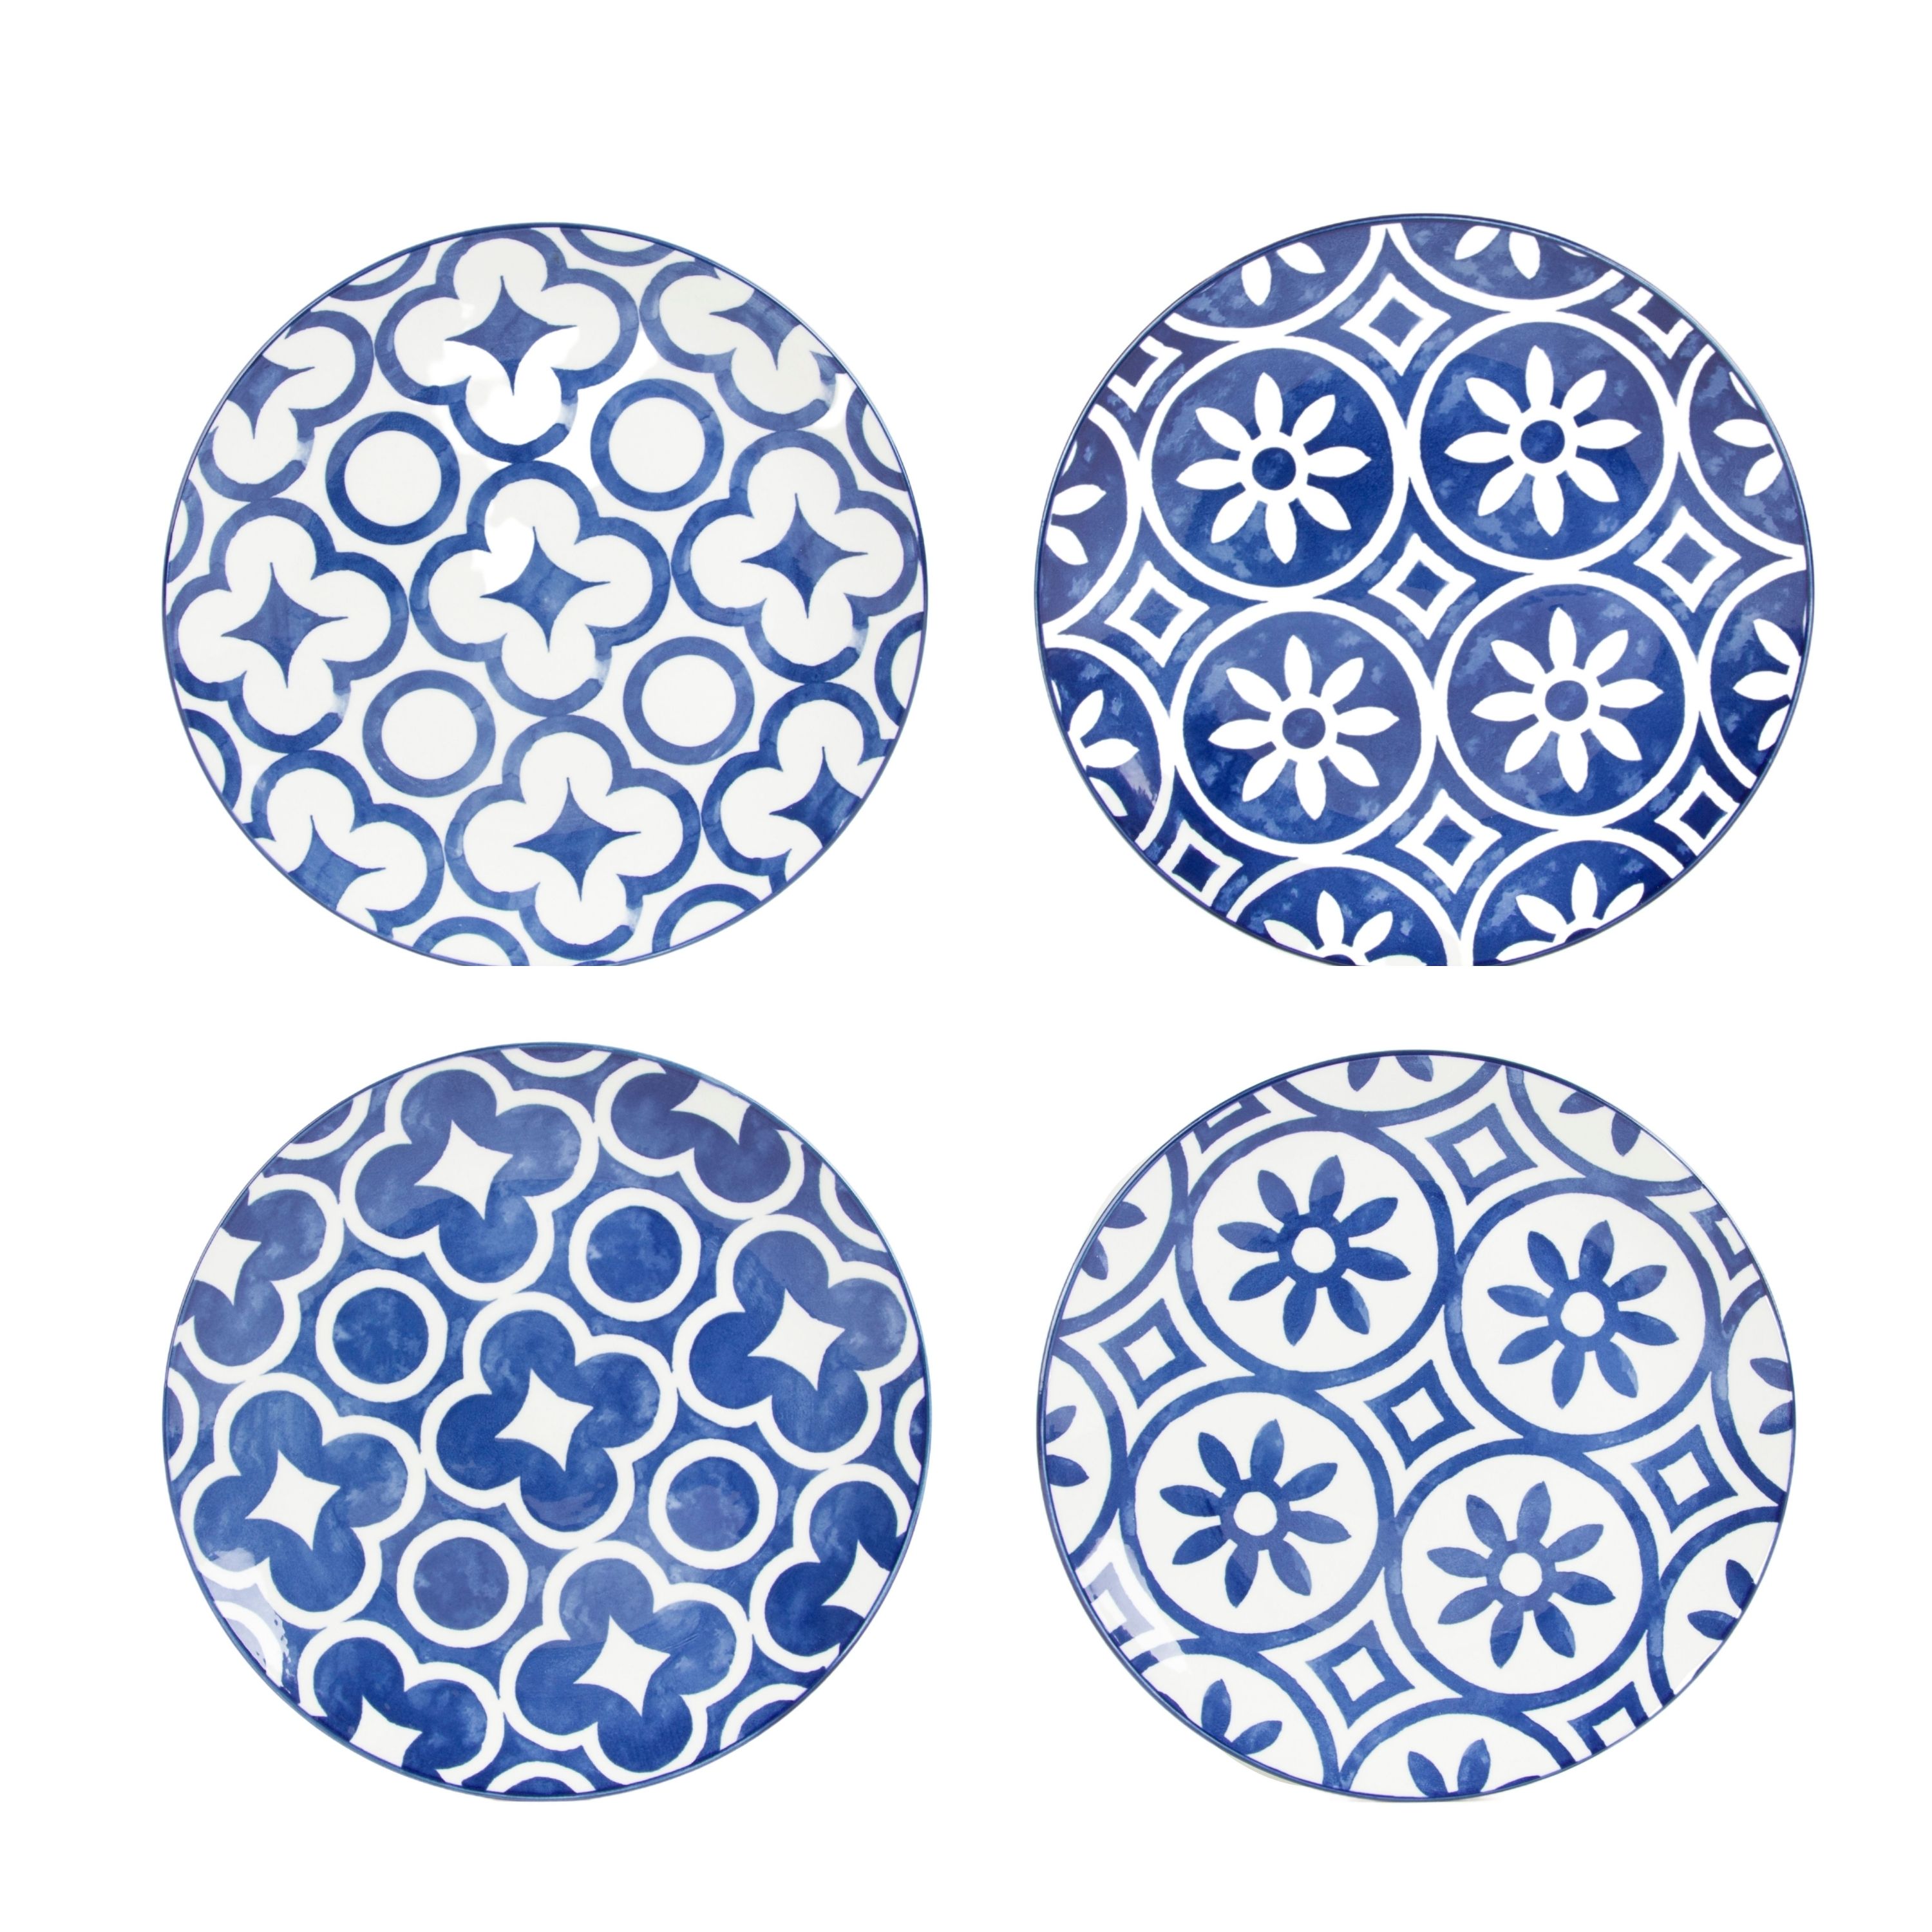 Mainstays Blue Rim Mixed White and Blue 10.5" Coupe Dinner Plates, Set of 4 - image 1 of 8